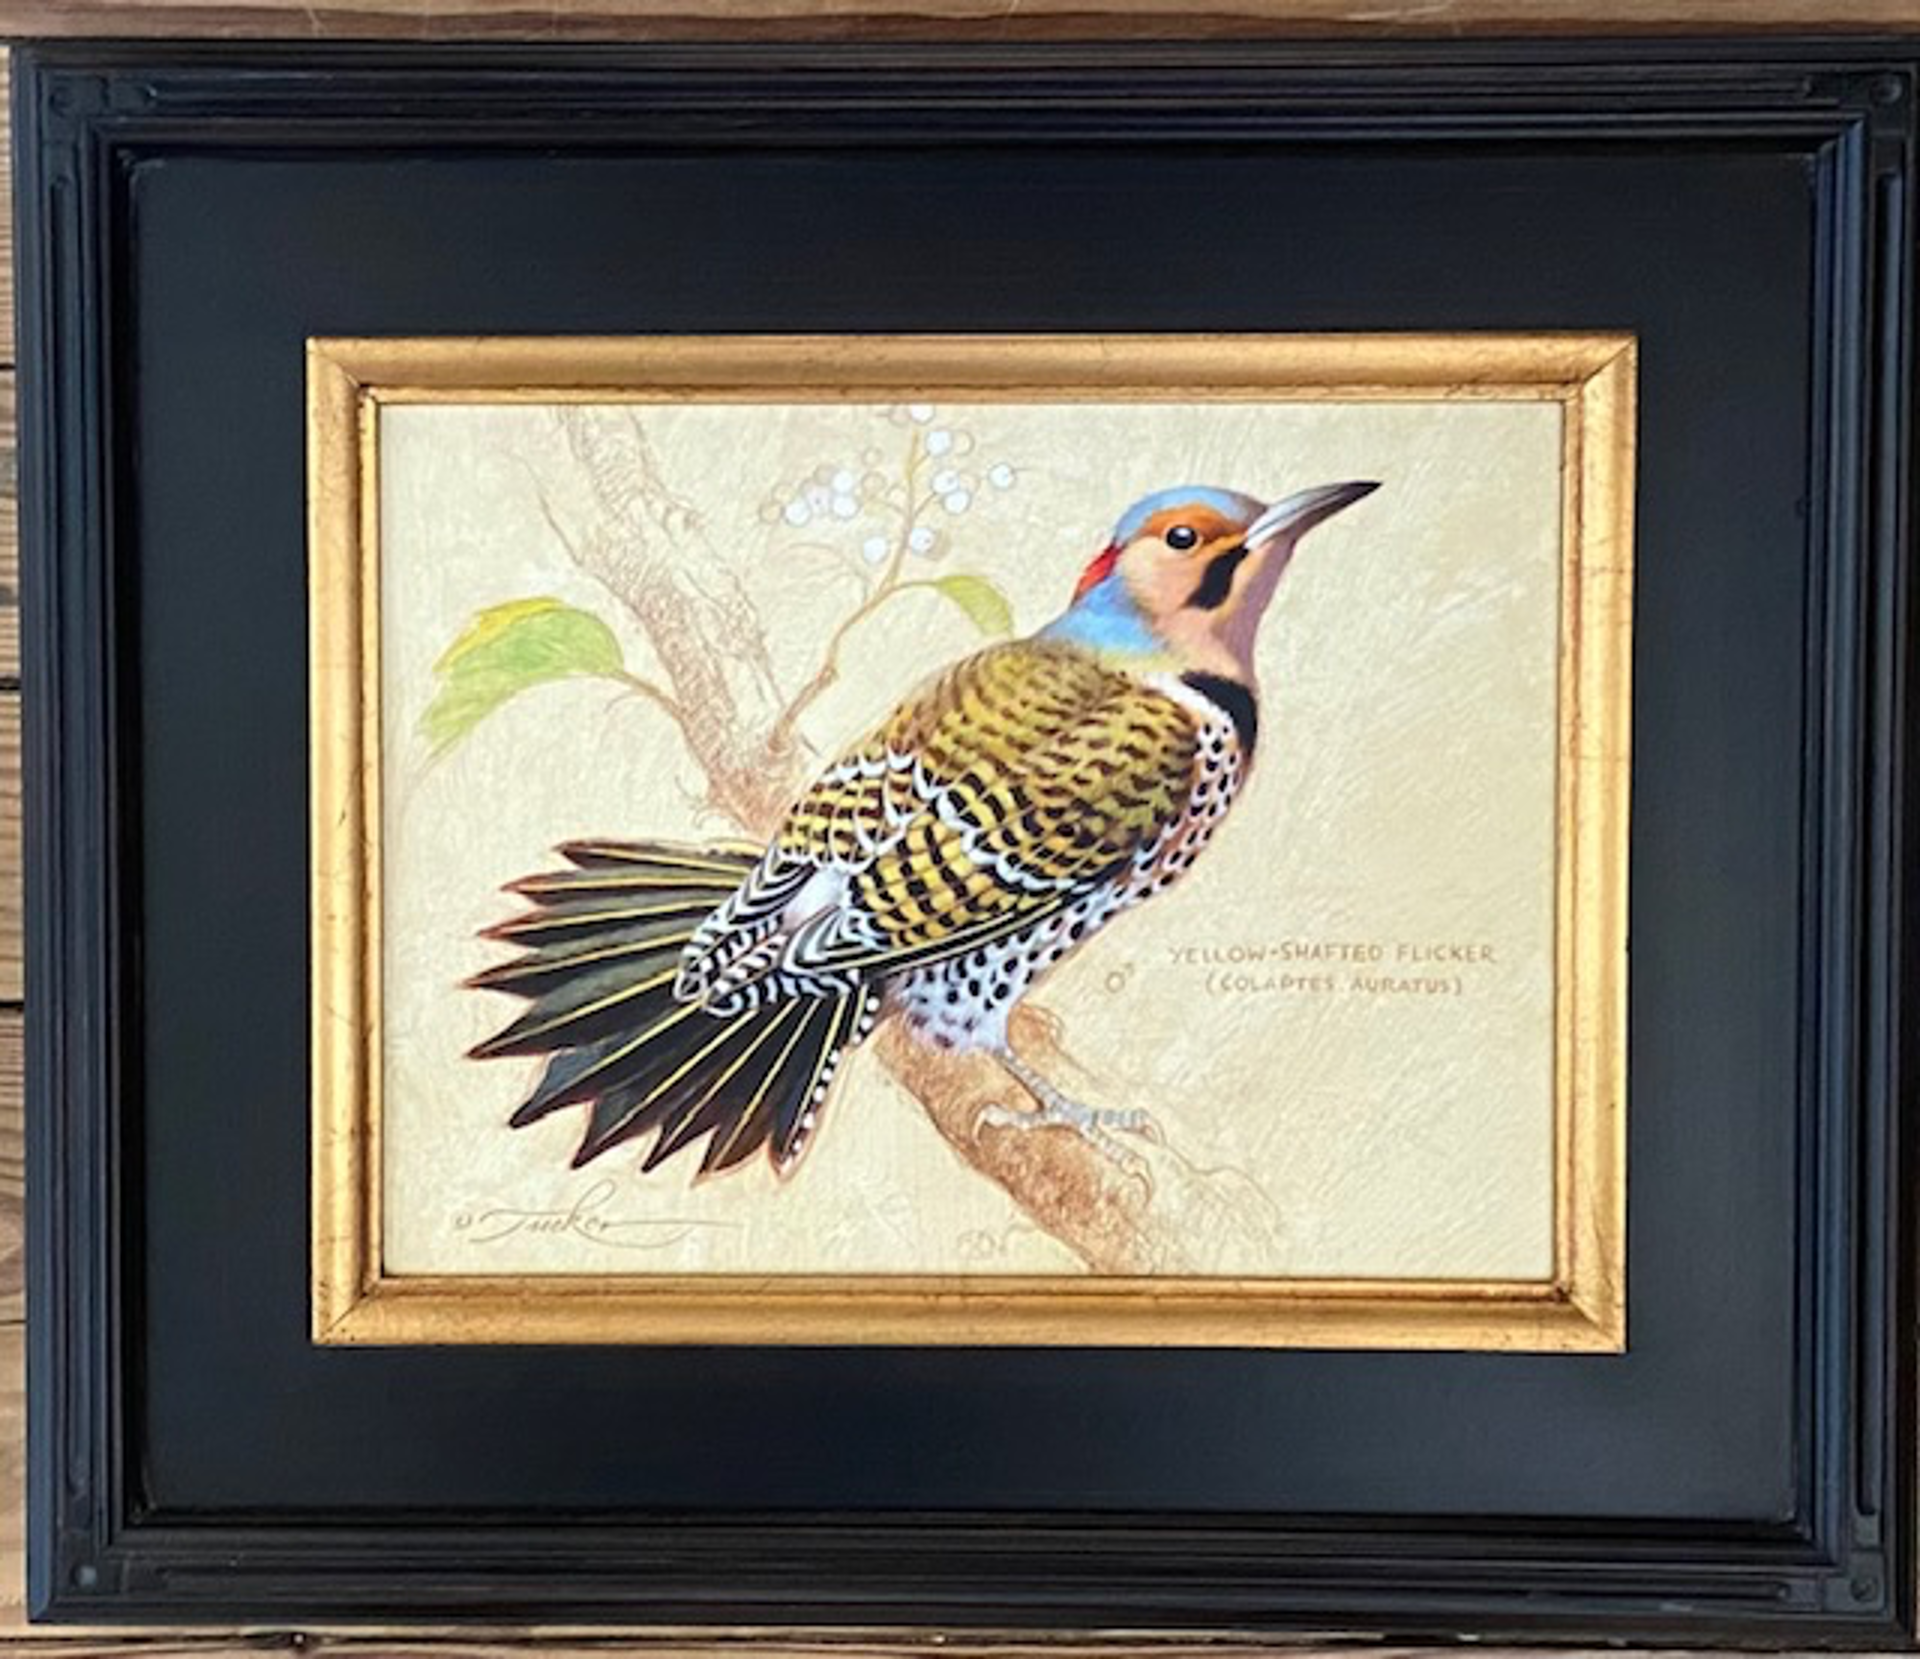 Yellow-Shafted Flicker #2 by Ezra Tucker